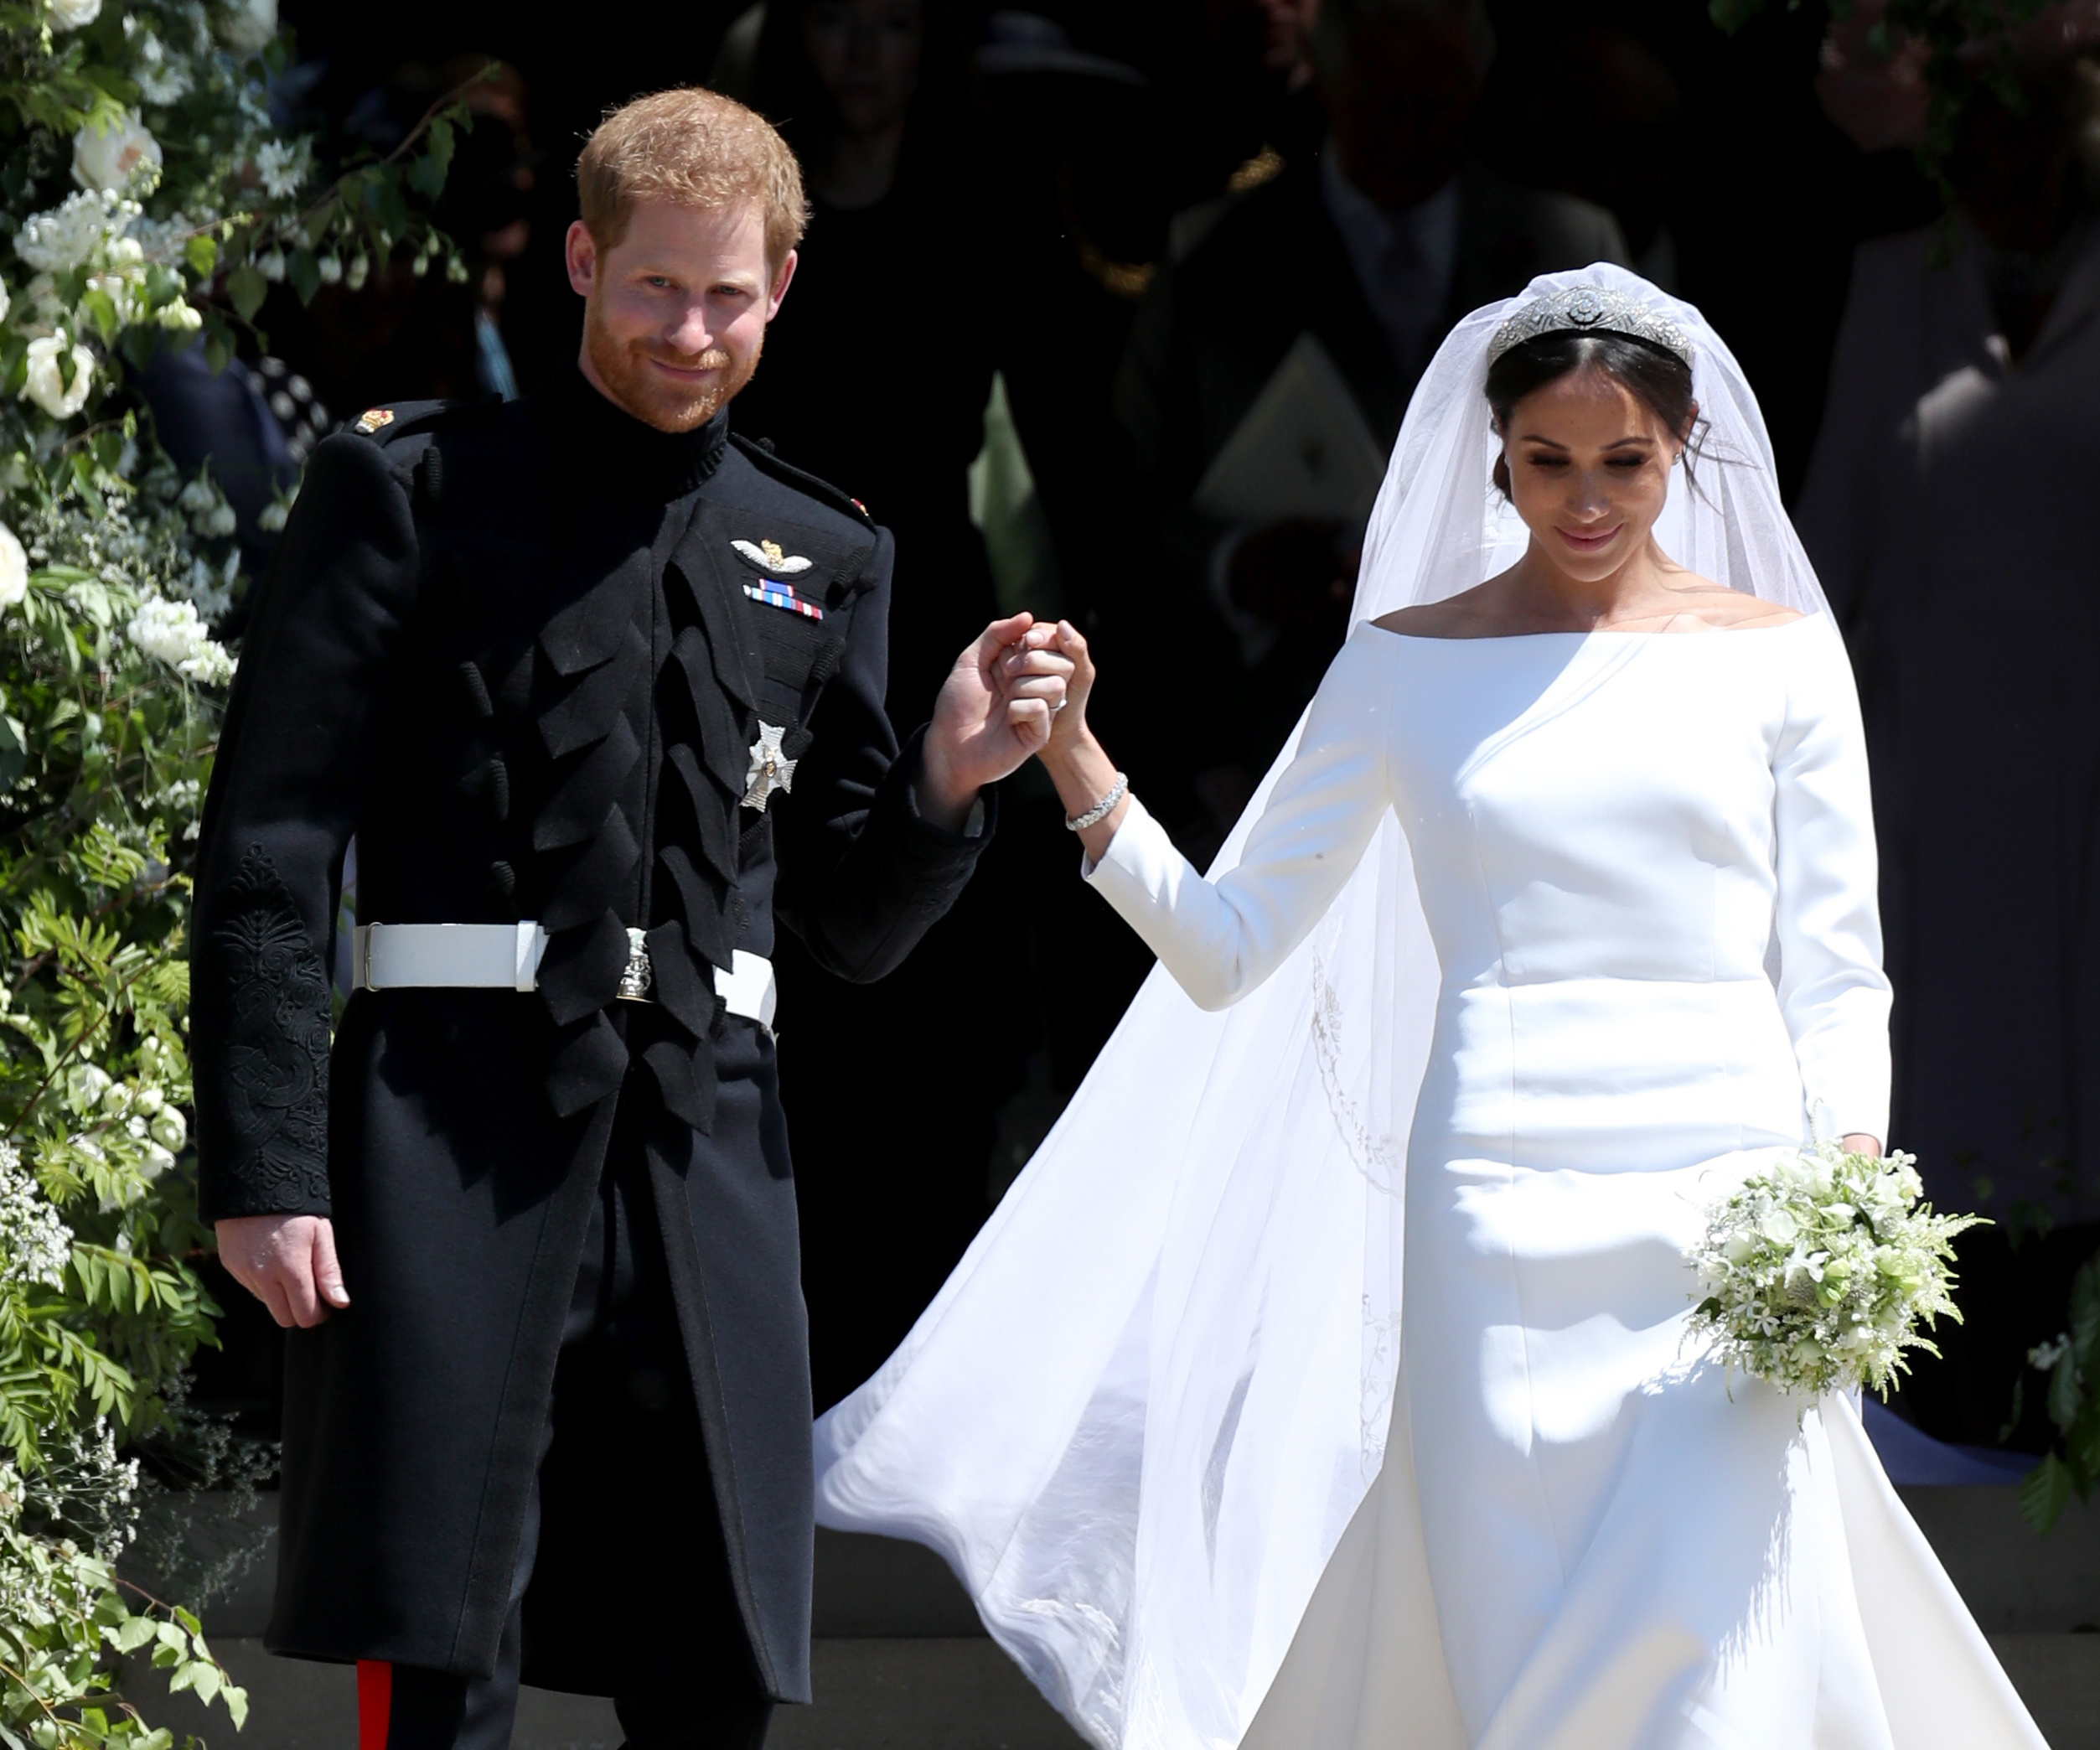 Harry and Meghan sent out the most picture perfect thank you notes to fans after their Royal wedding